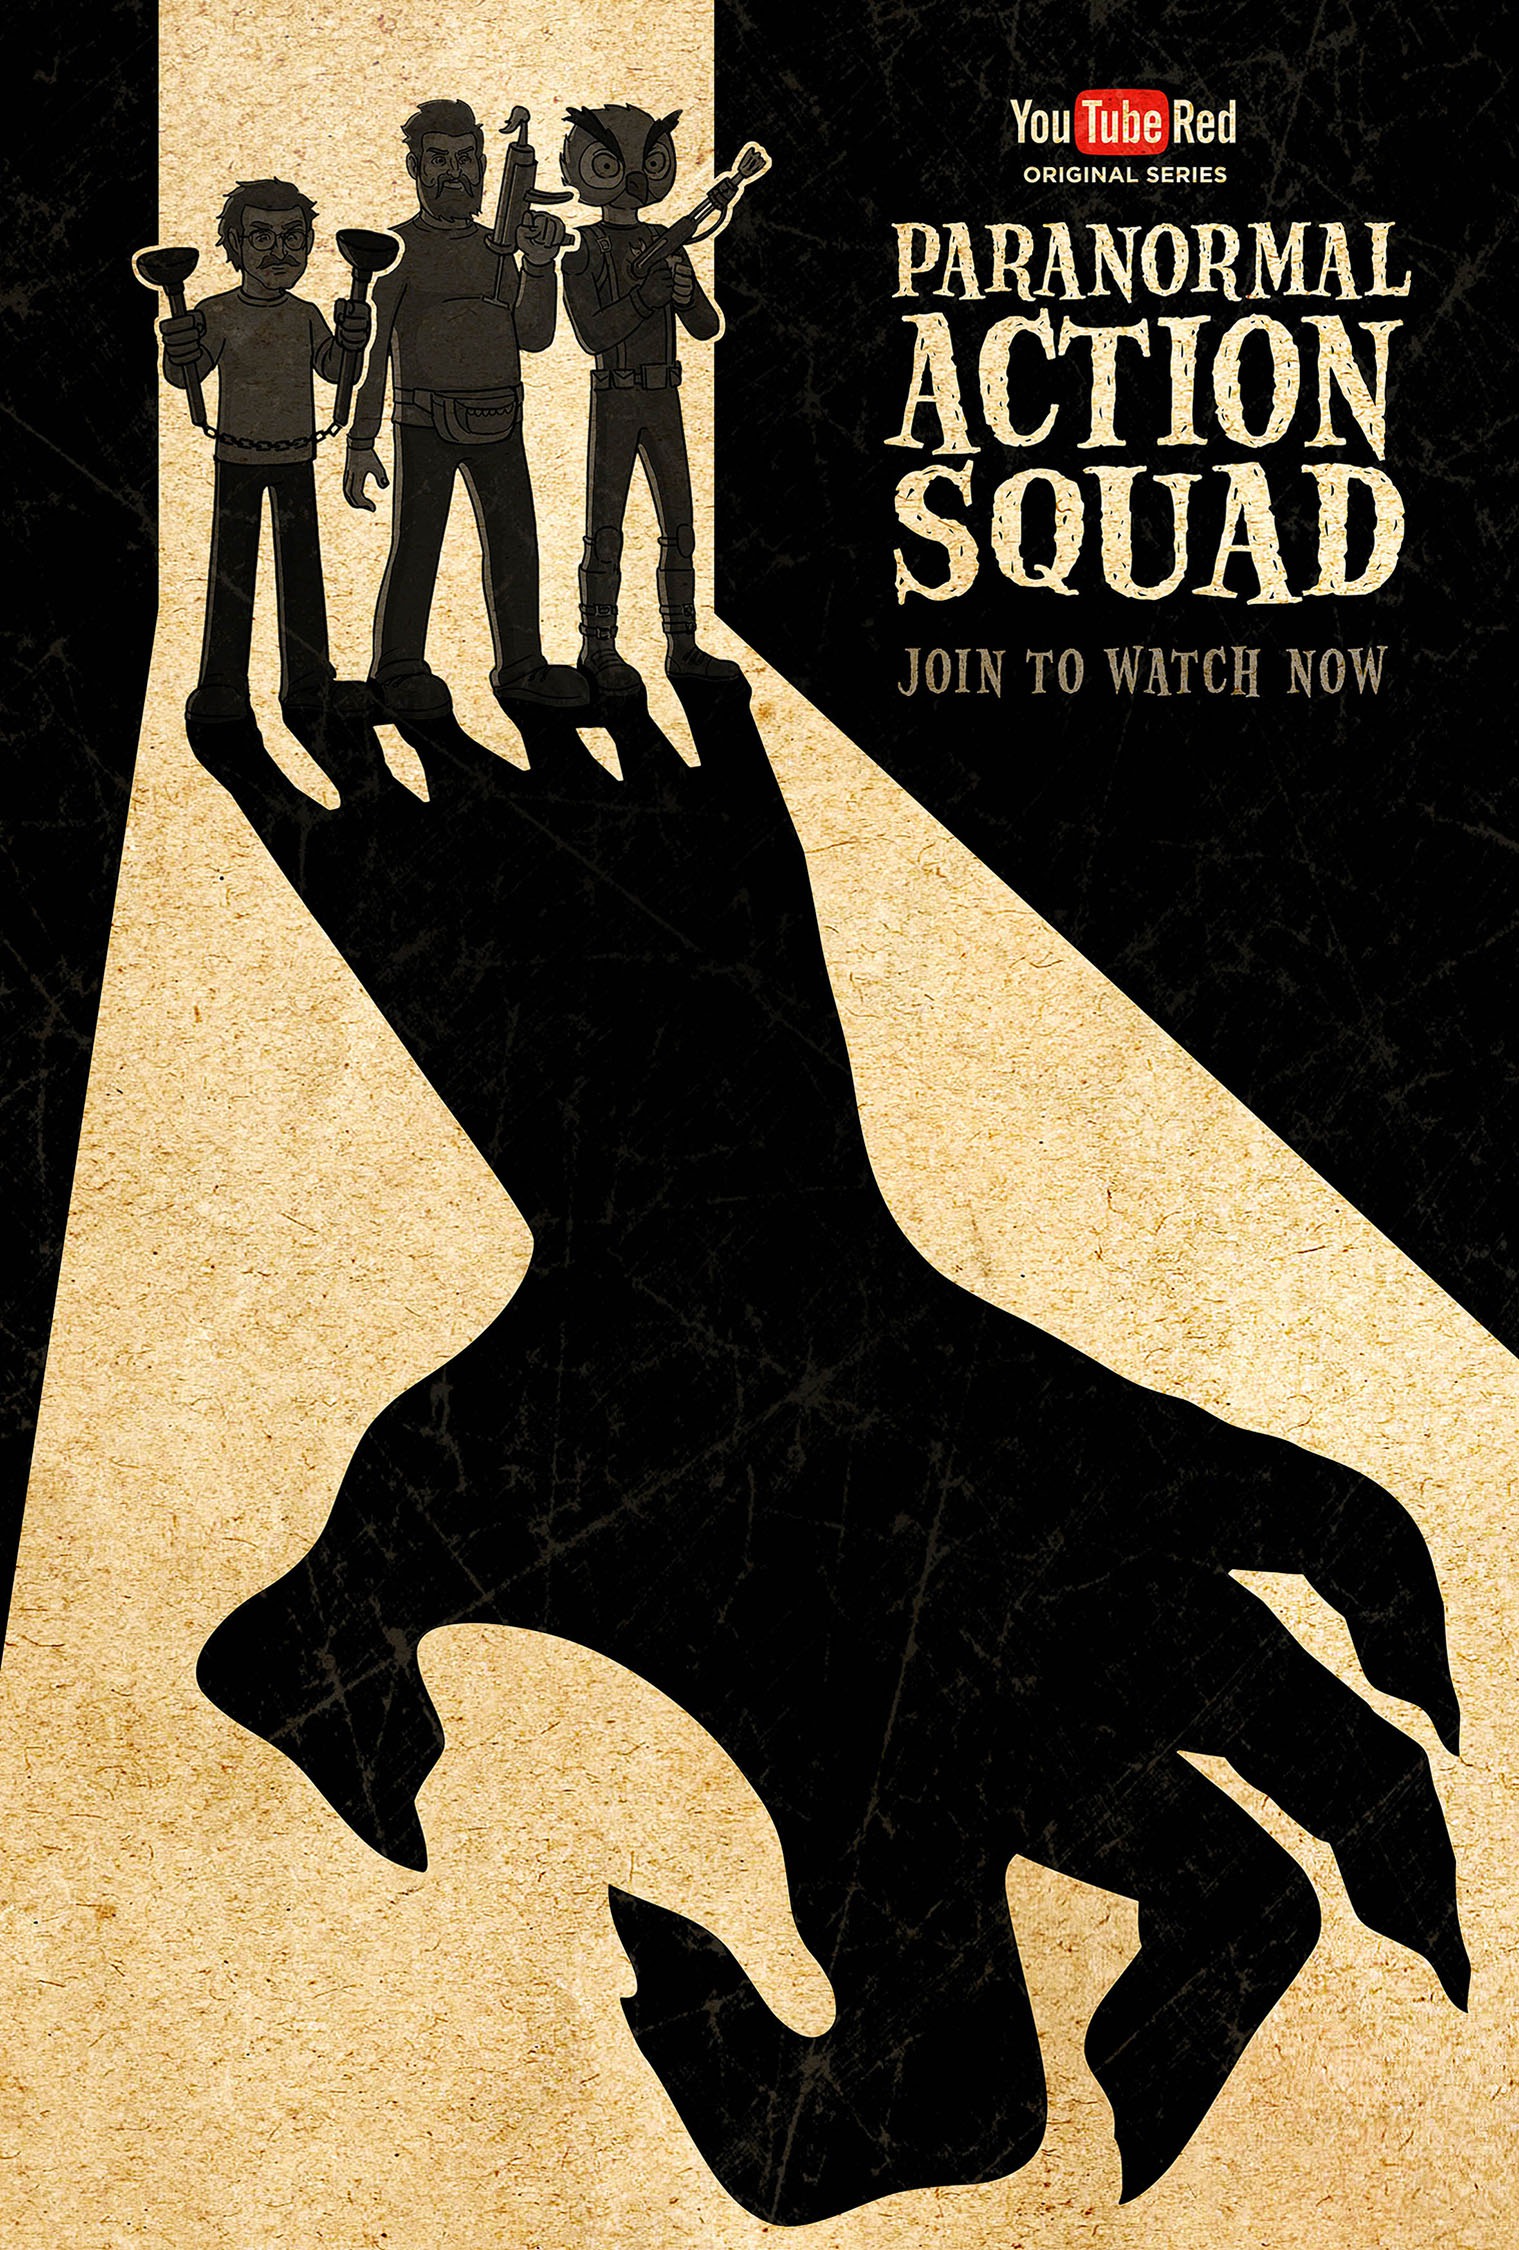 Mega Sized TV Poster Image for Paranormal Action Squad (#7 of 11)